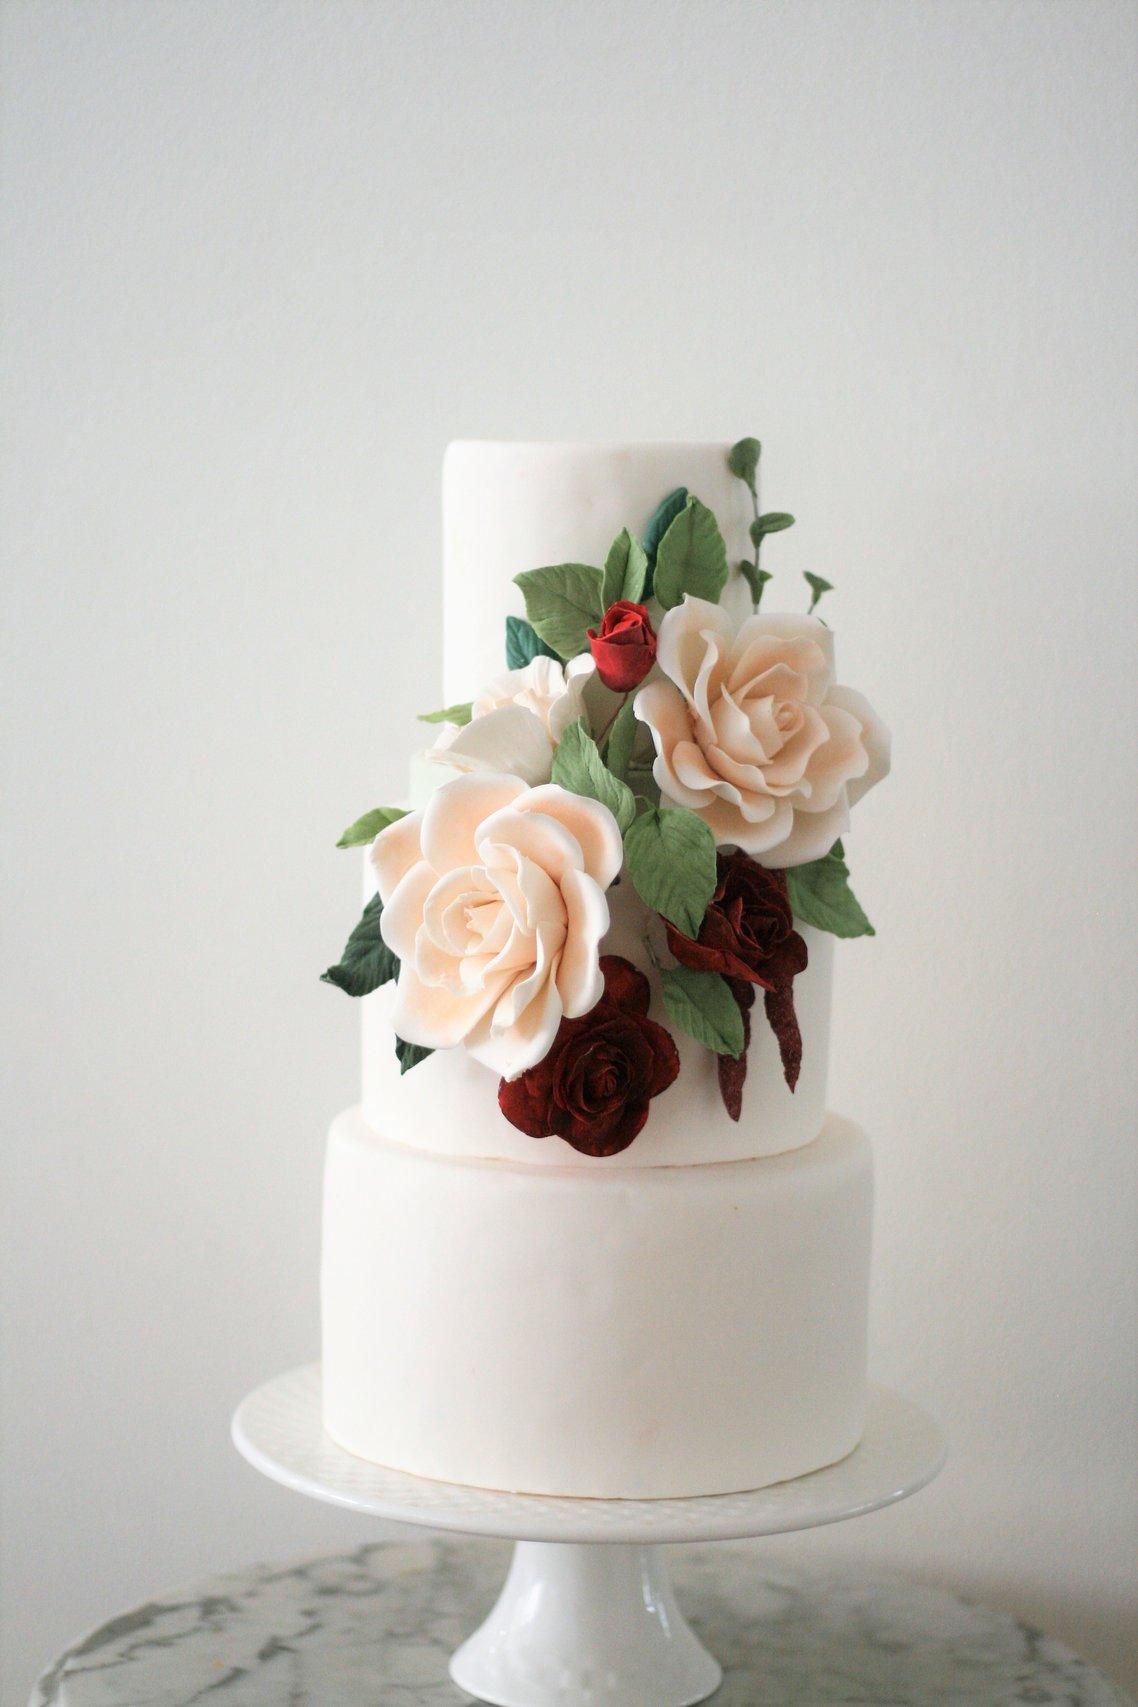 10 Of The Best Simple Wedding Cakes You'll Love